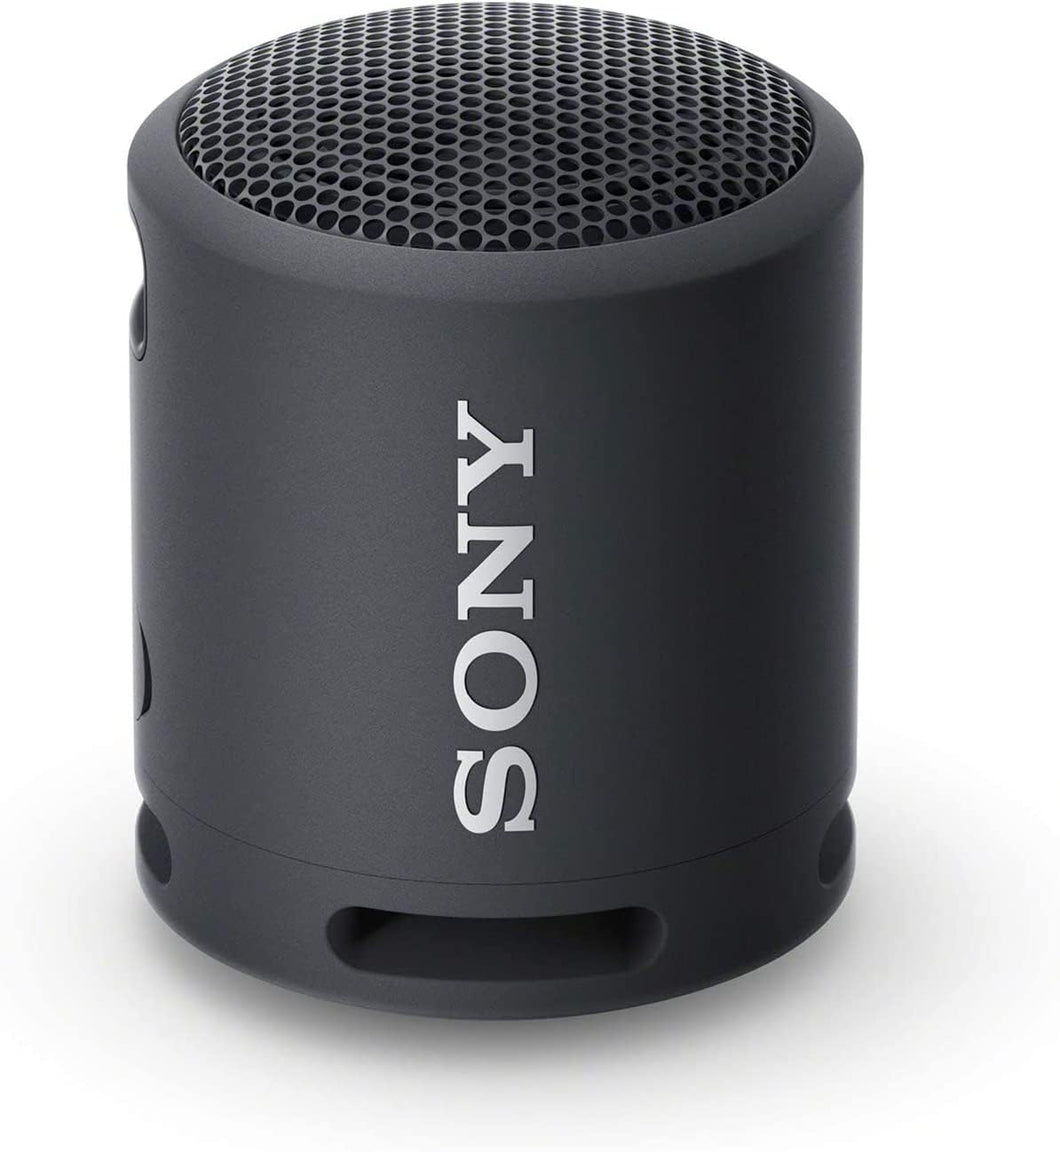 Sony SRSXB13/B Extra Bass Portable Waterproof Speaker with Bluetooth, USB Type-C, 16 Hours Battery Life - REFURBISHED